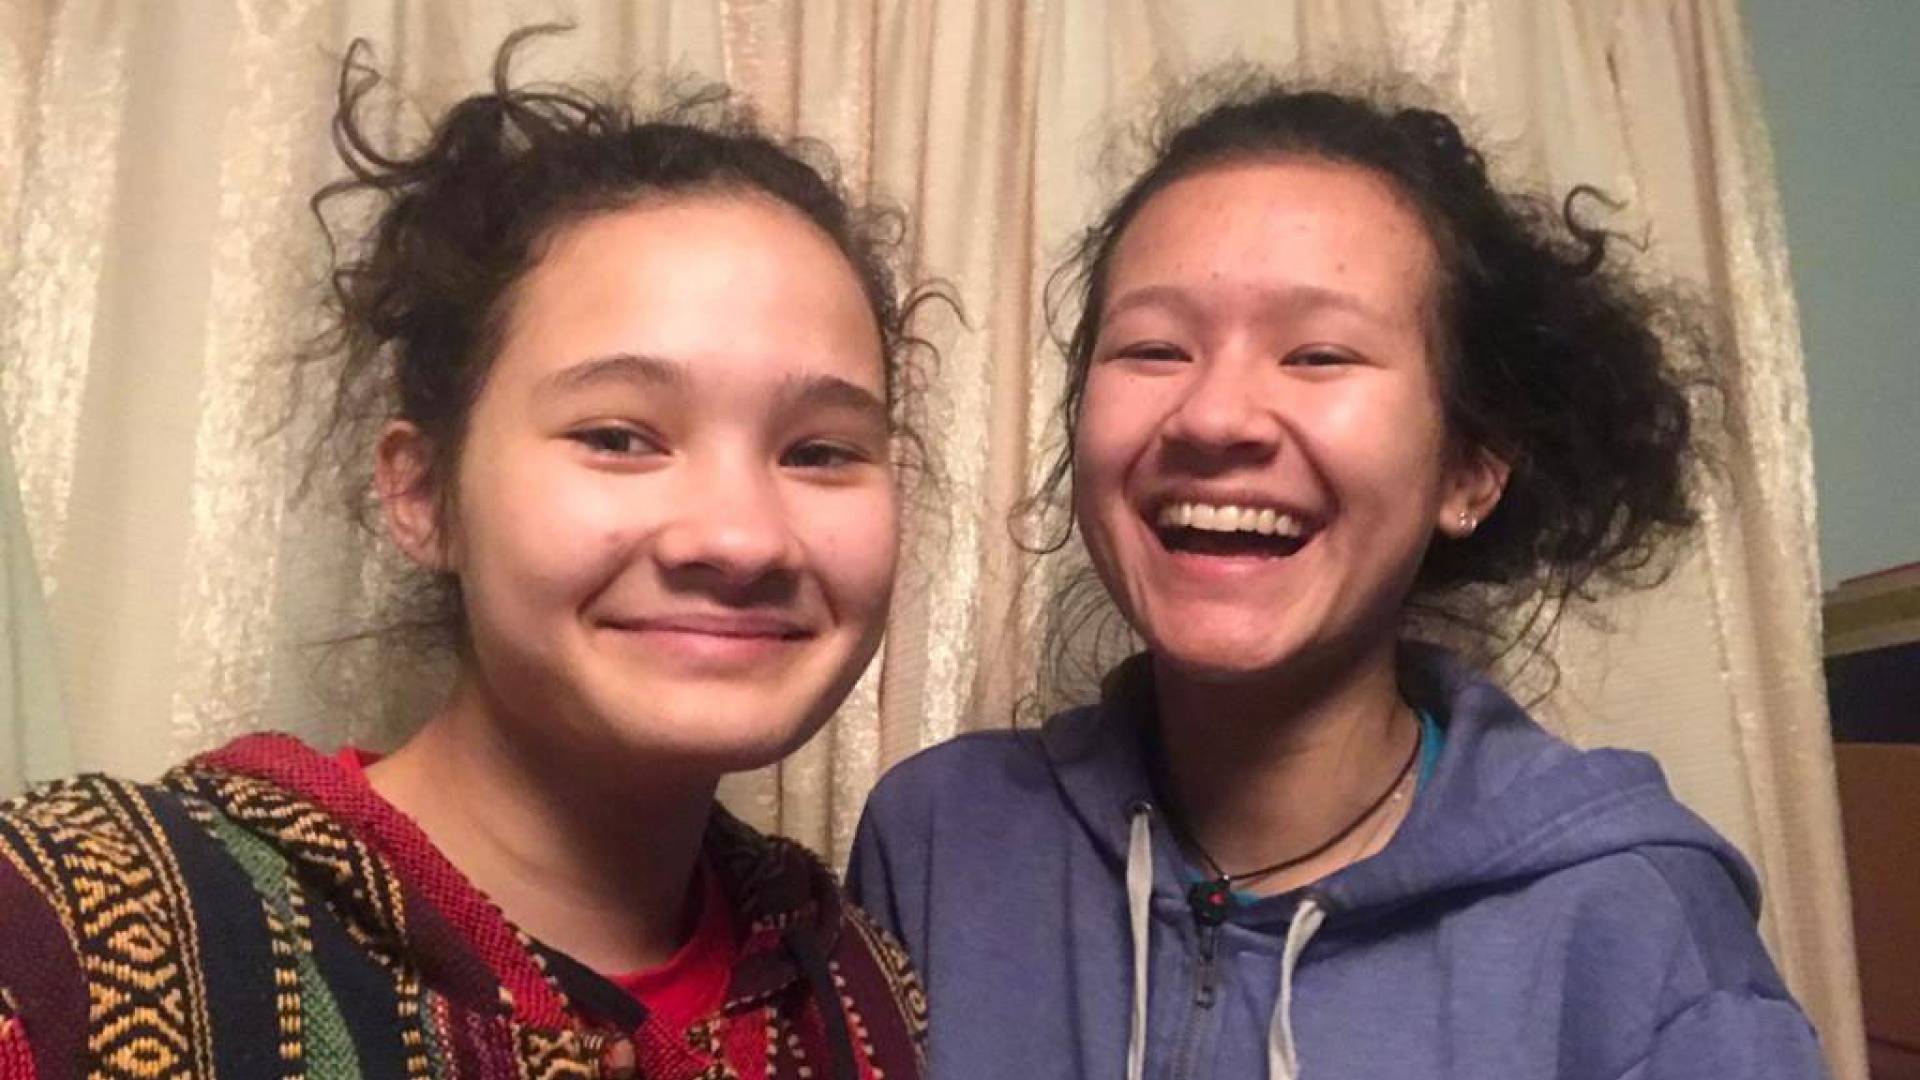 A student poses with her sister